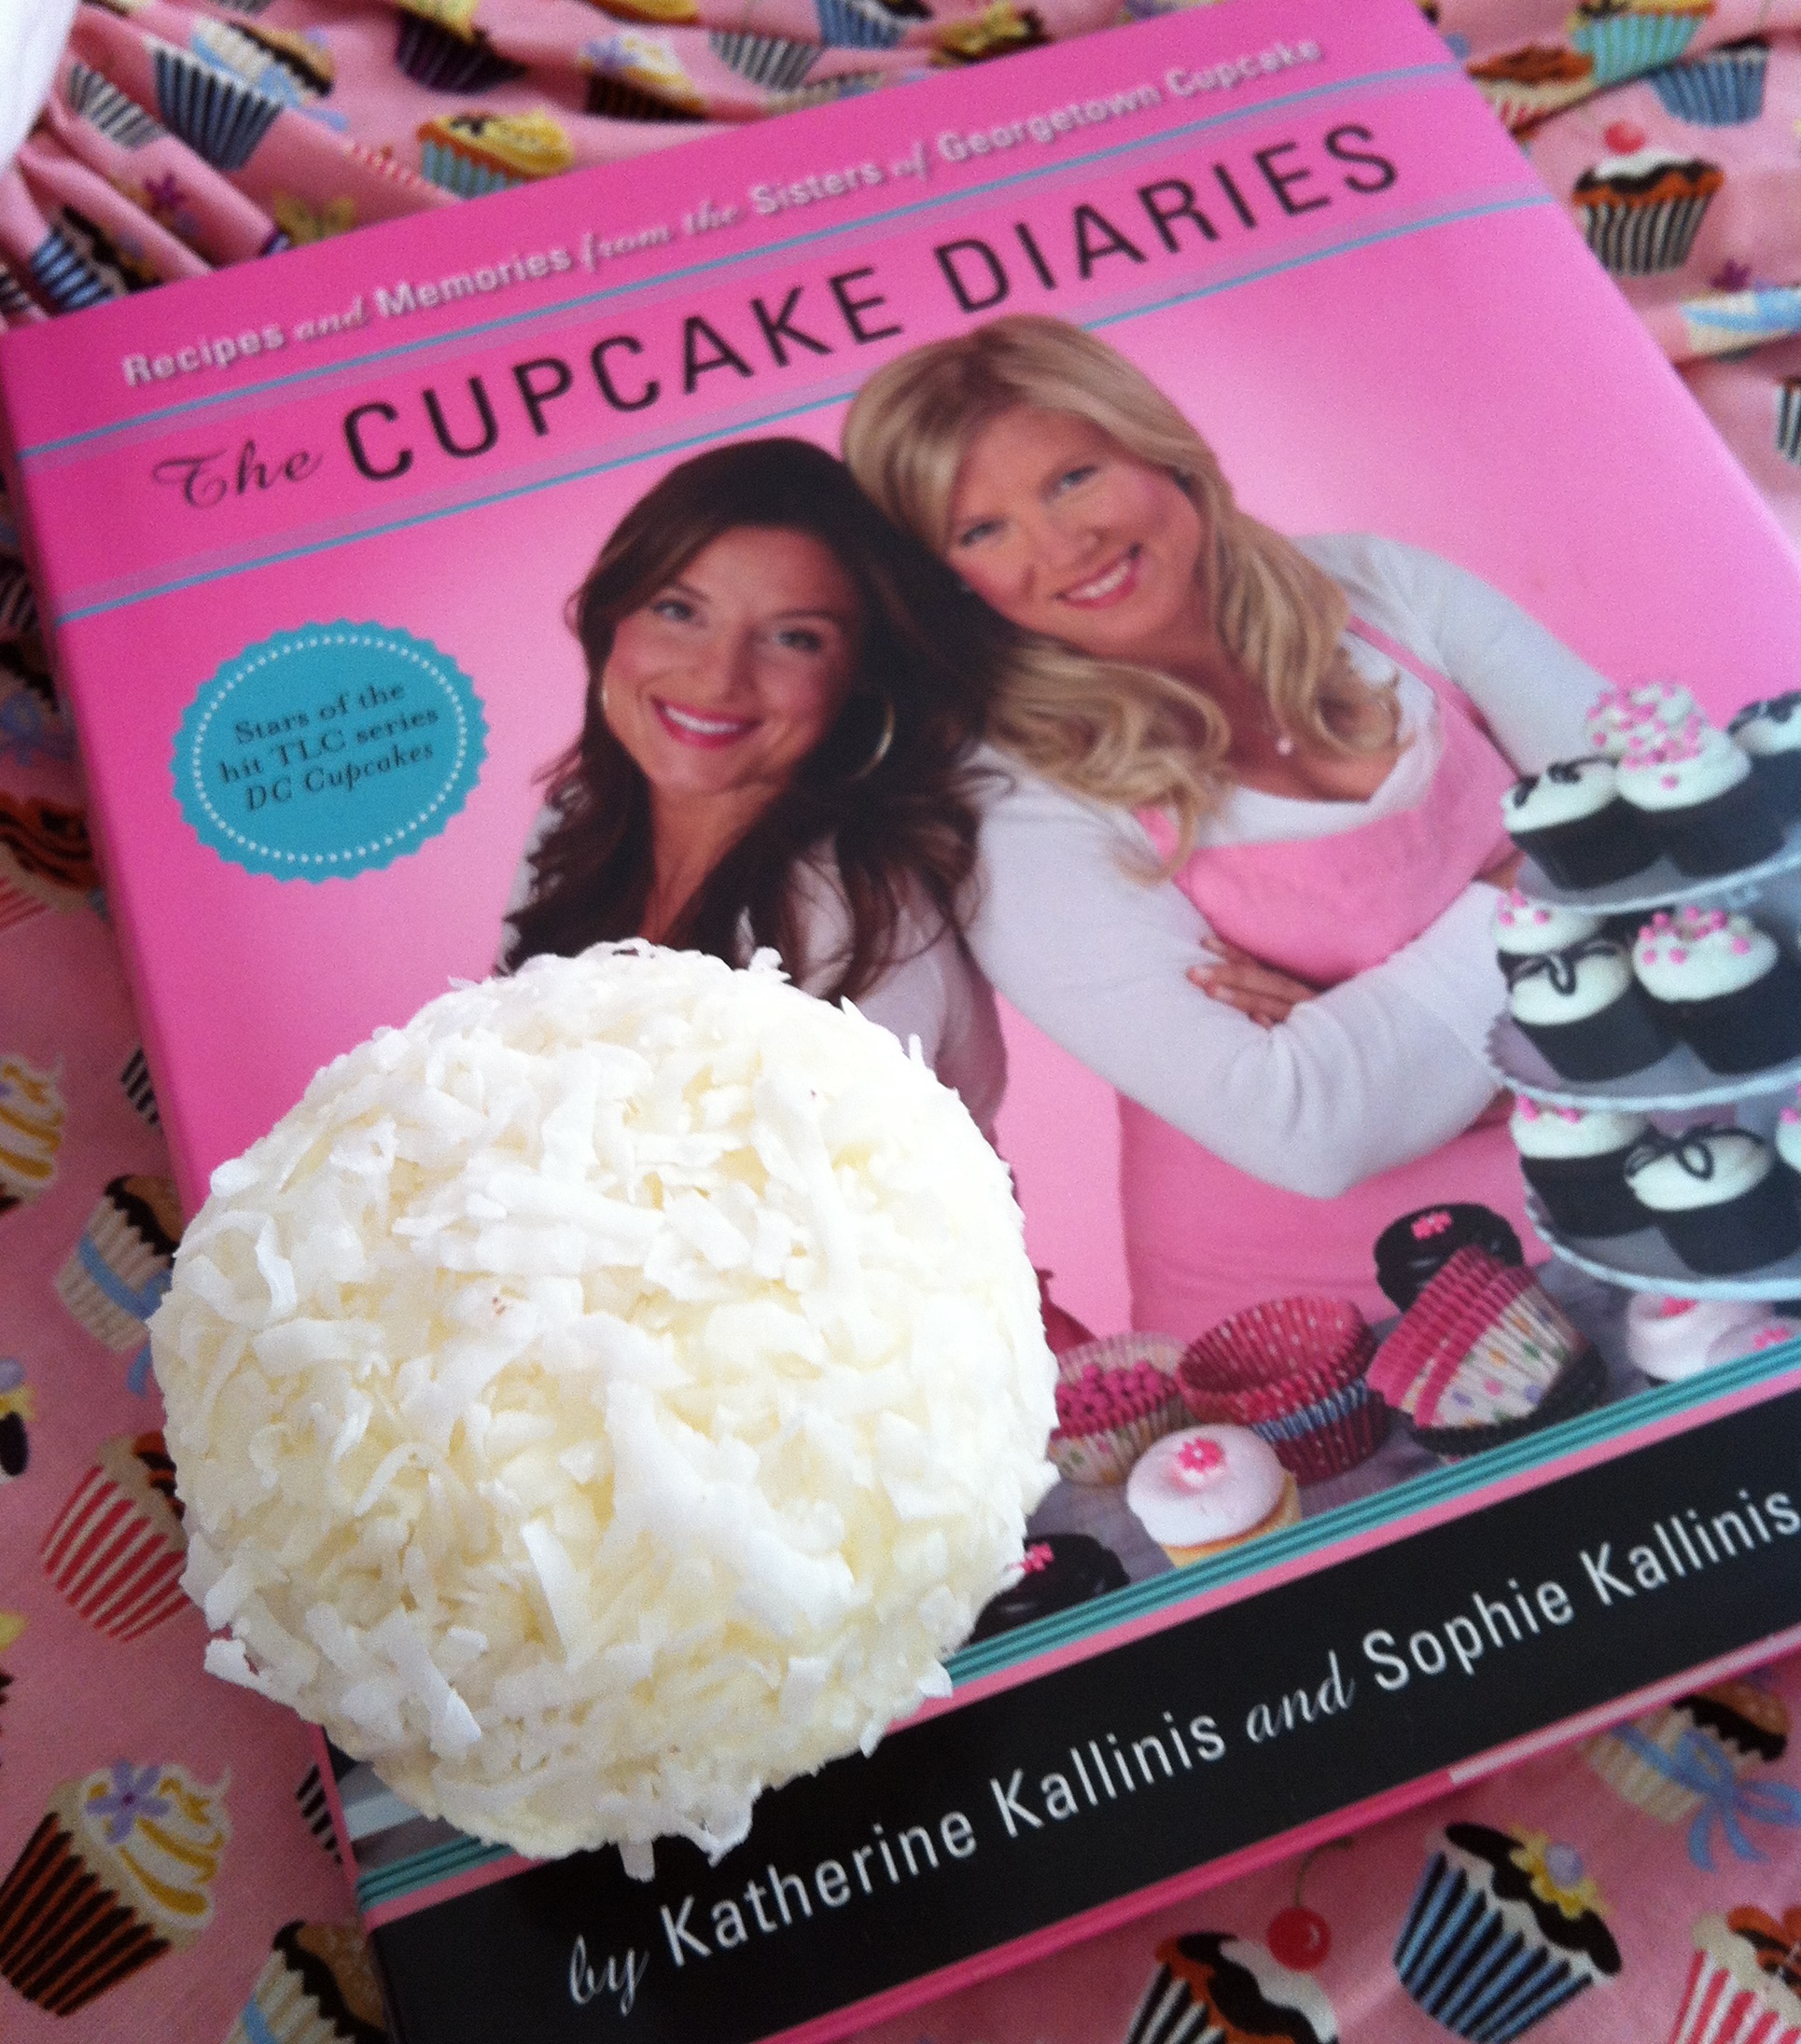 Oh-So-Sweet cupcakes, Sophie & Katherine bring us The Cupcake Diaries! {win the book & a dozen cucpakes!}